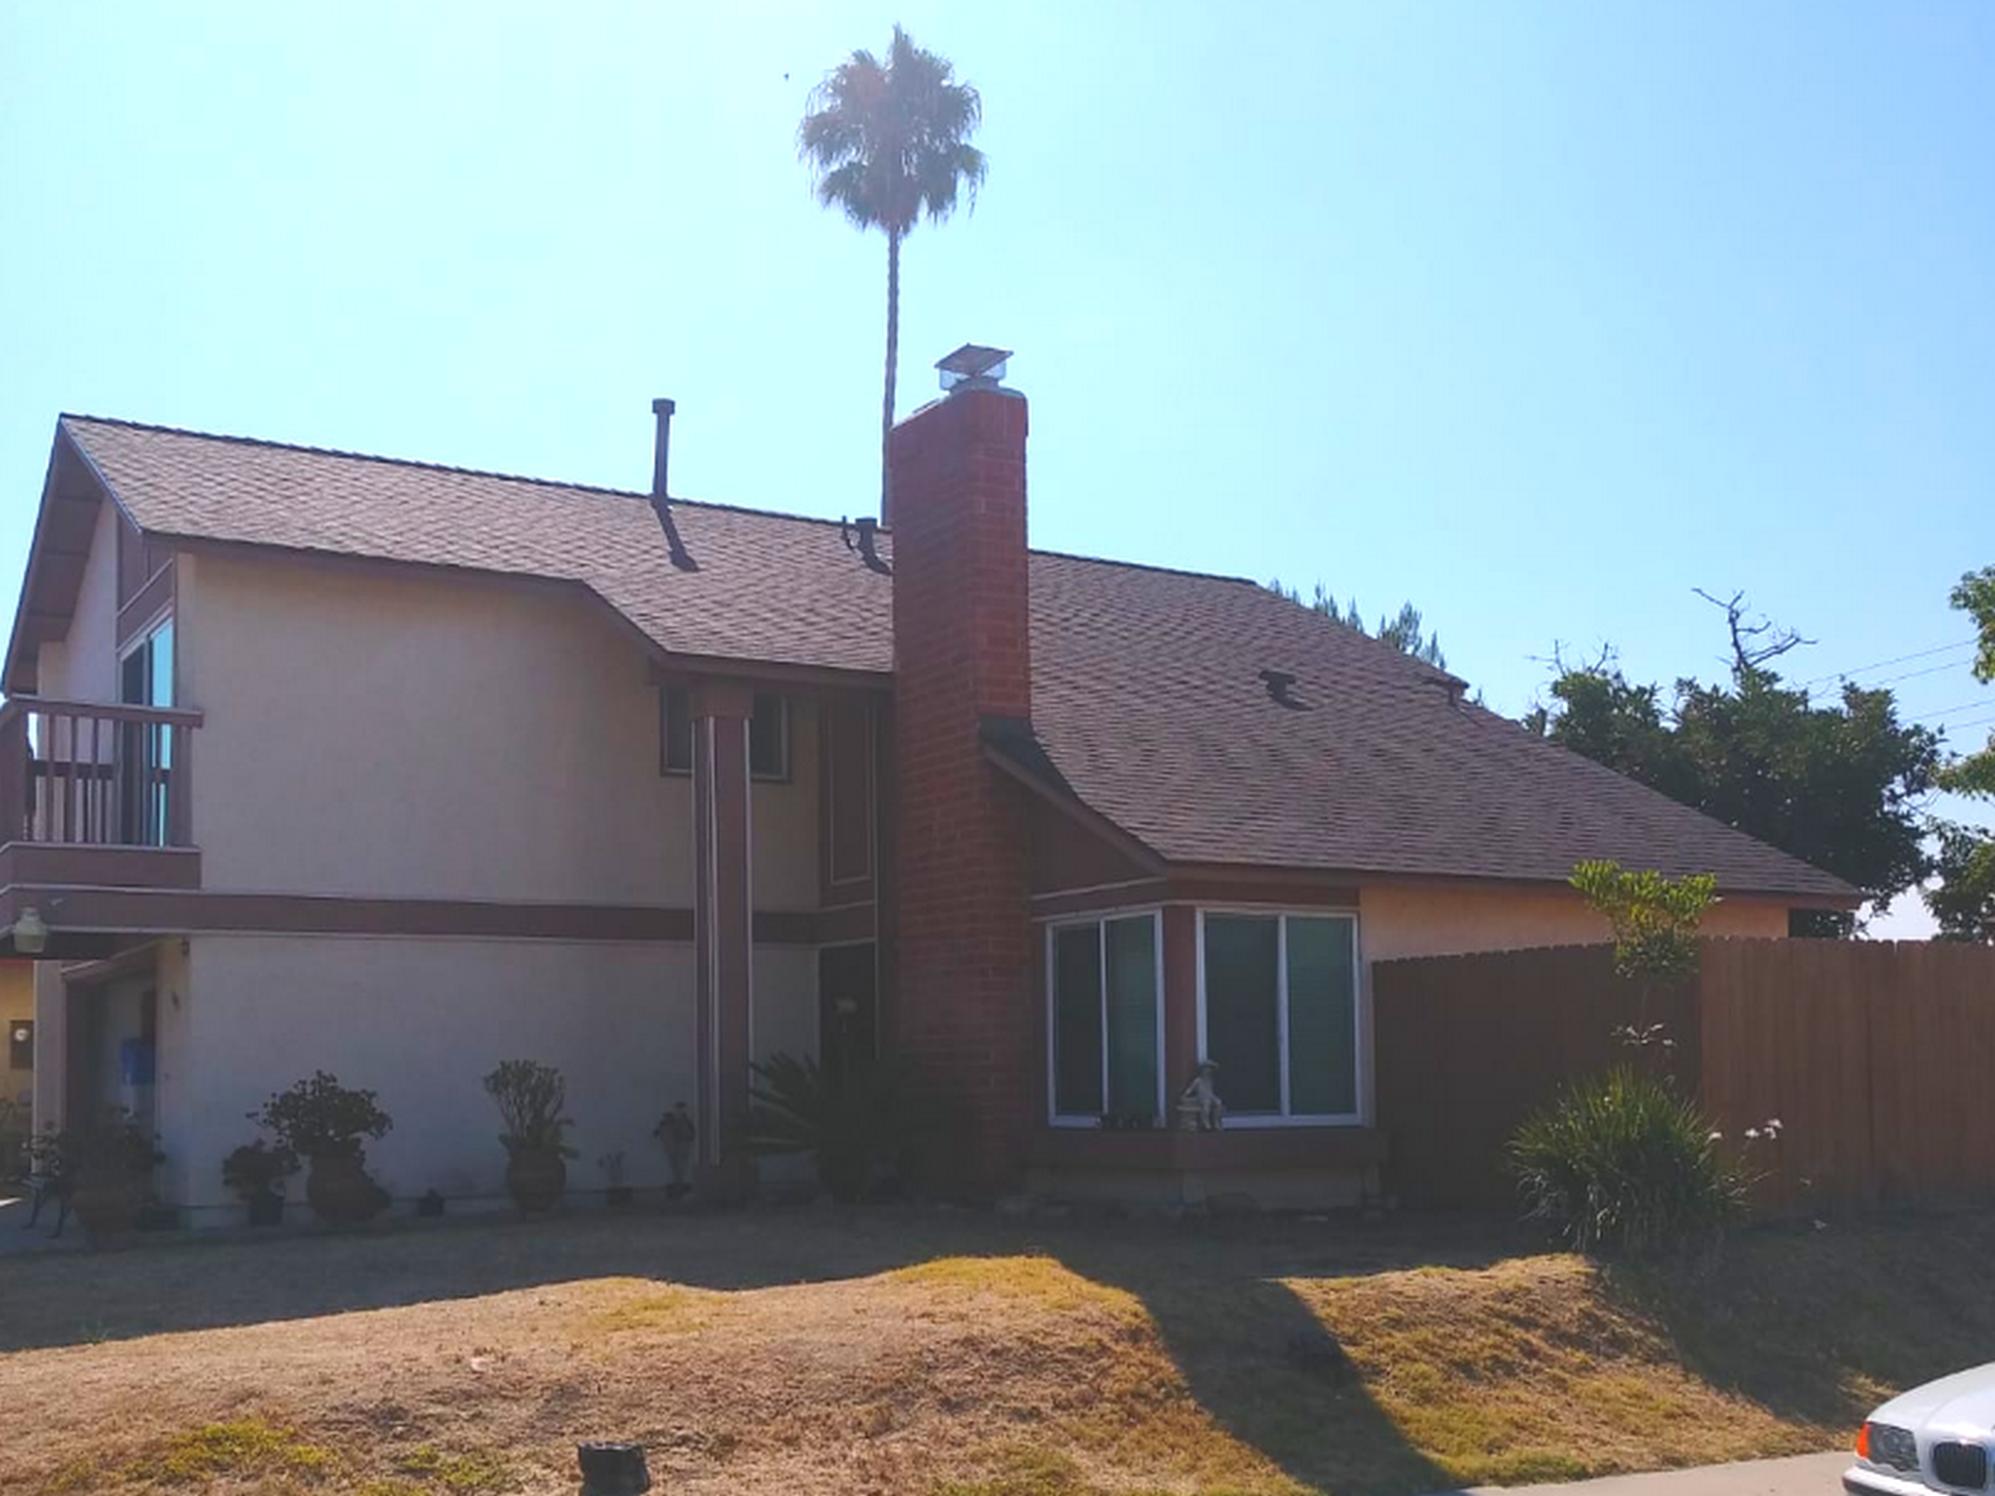 Genesis Home Improvements just finished a roof replacement project for the Limbo family in San Diego. The process started with our specialist arriving on time with roofing information, insulation and shingle samples.